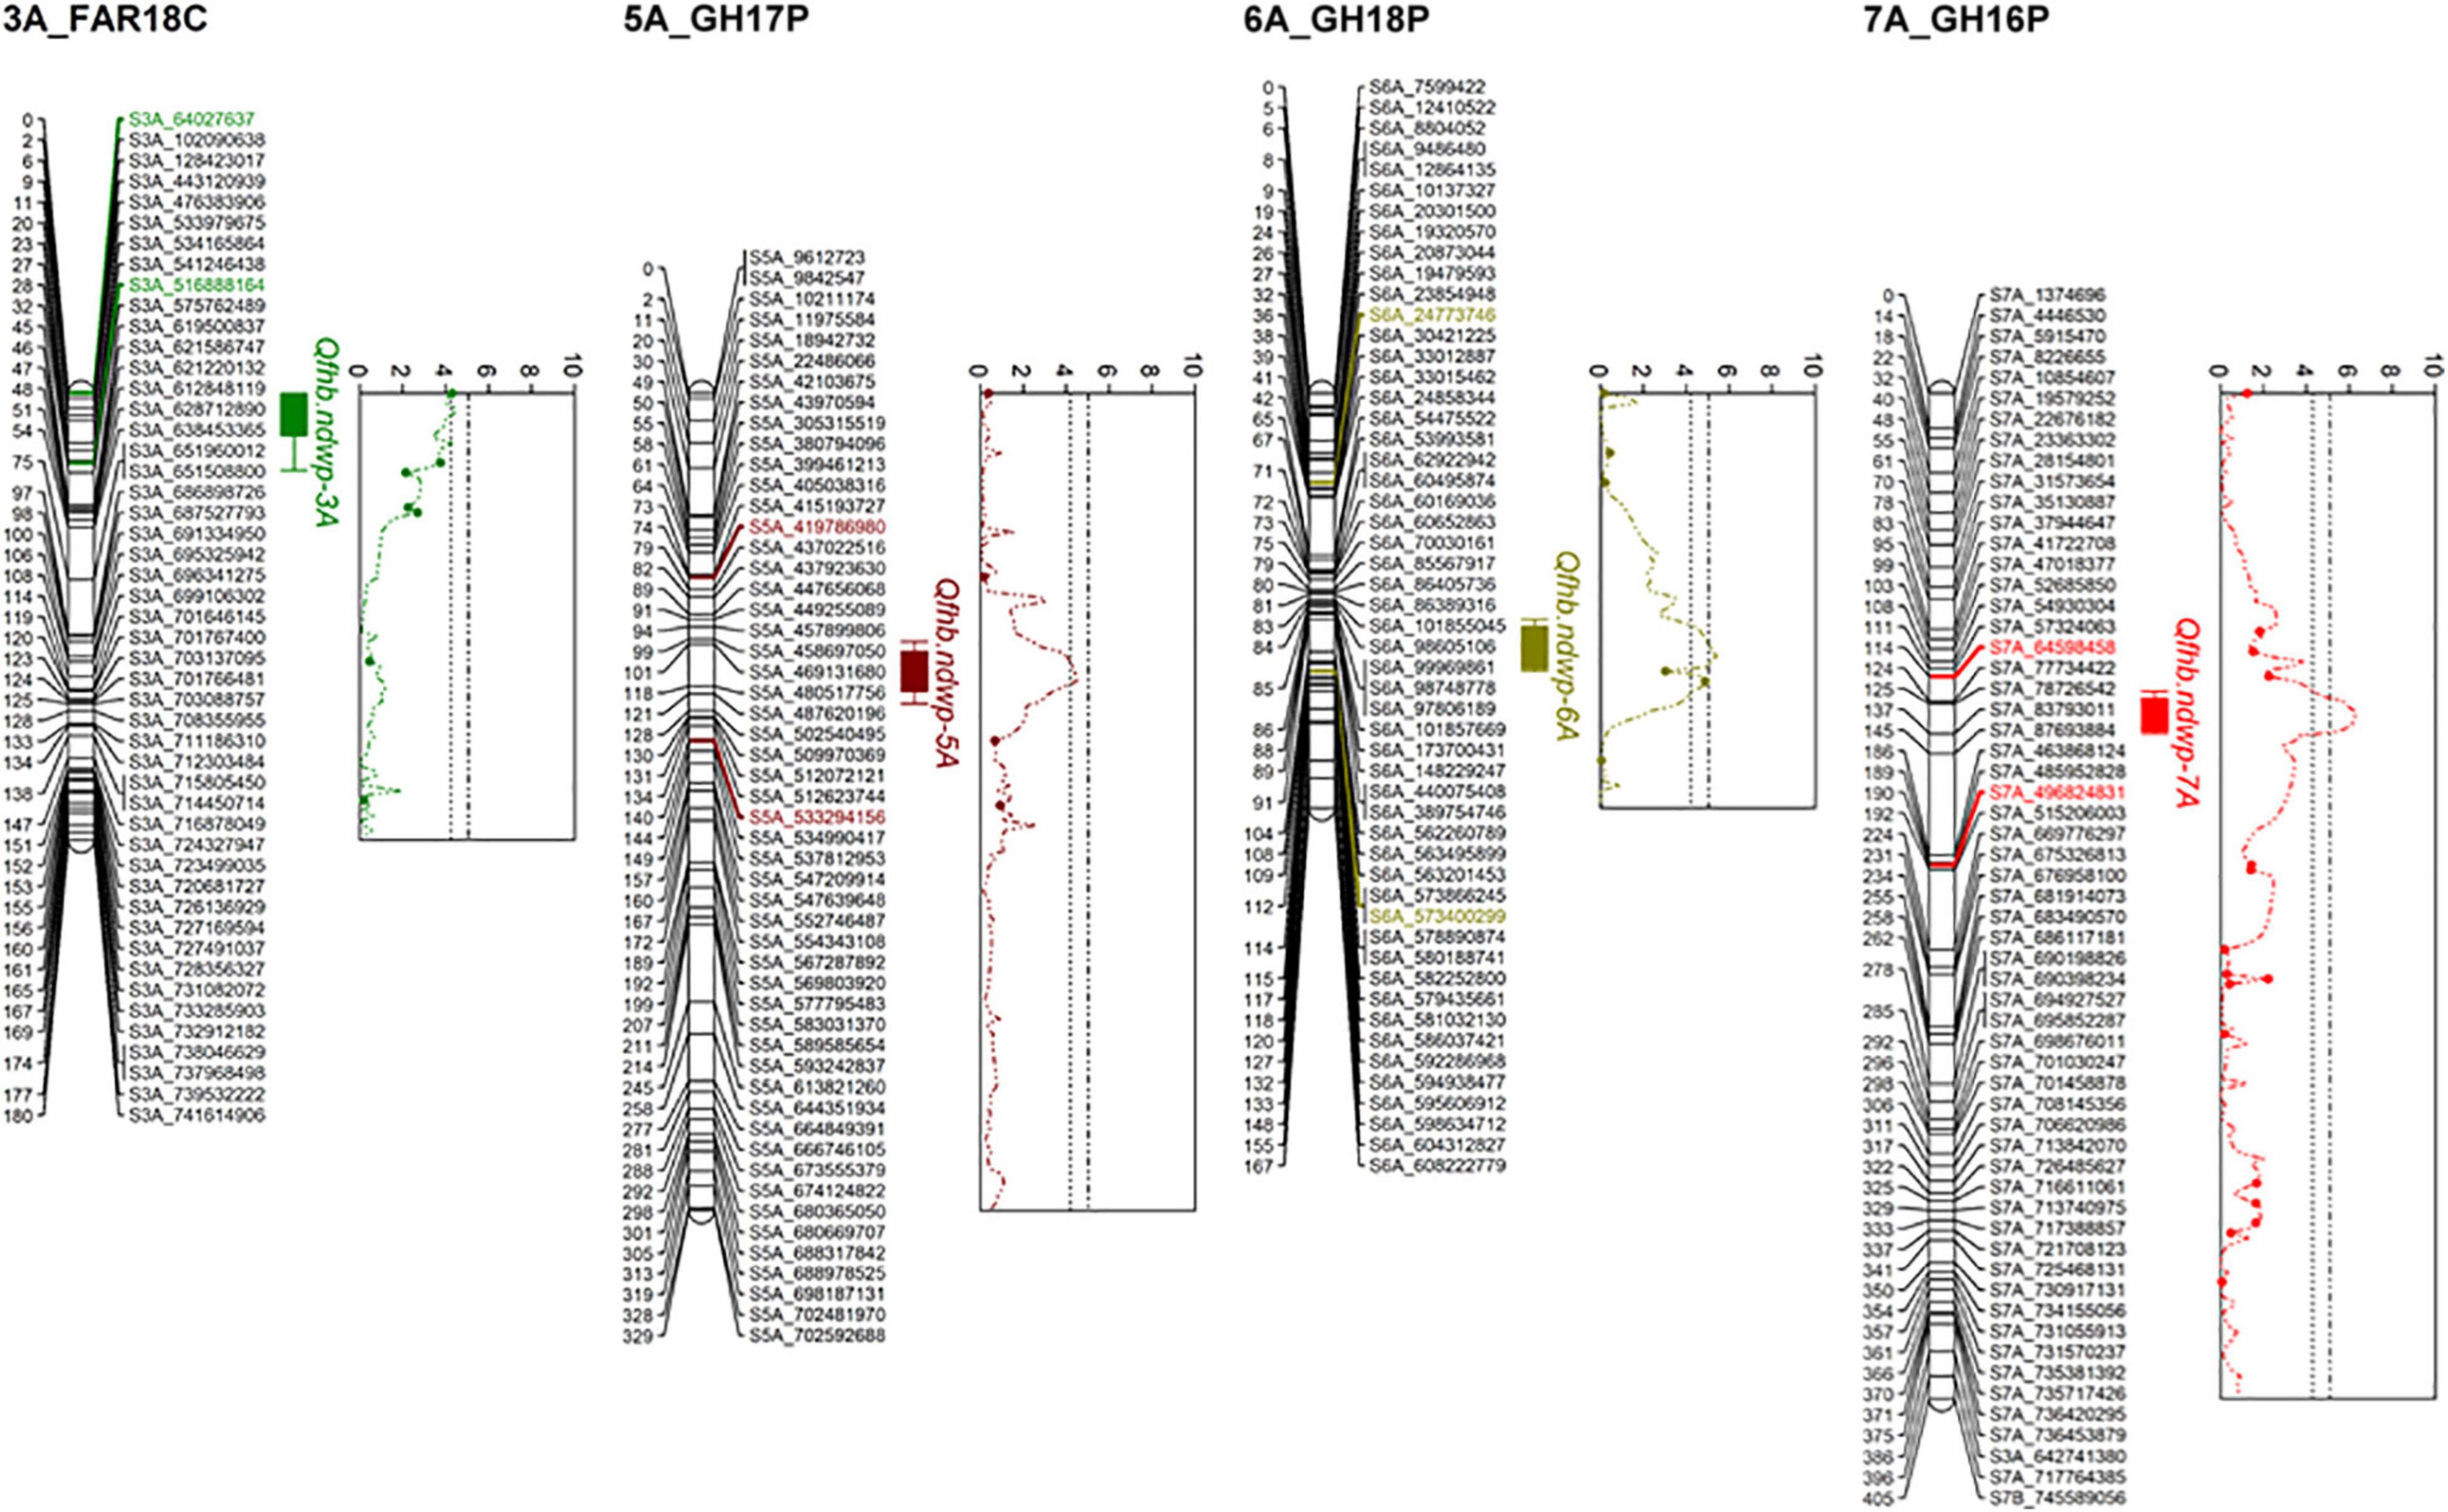 Frontiers | Molecular Mapping of Quantitative Trait Loci for 